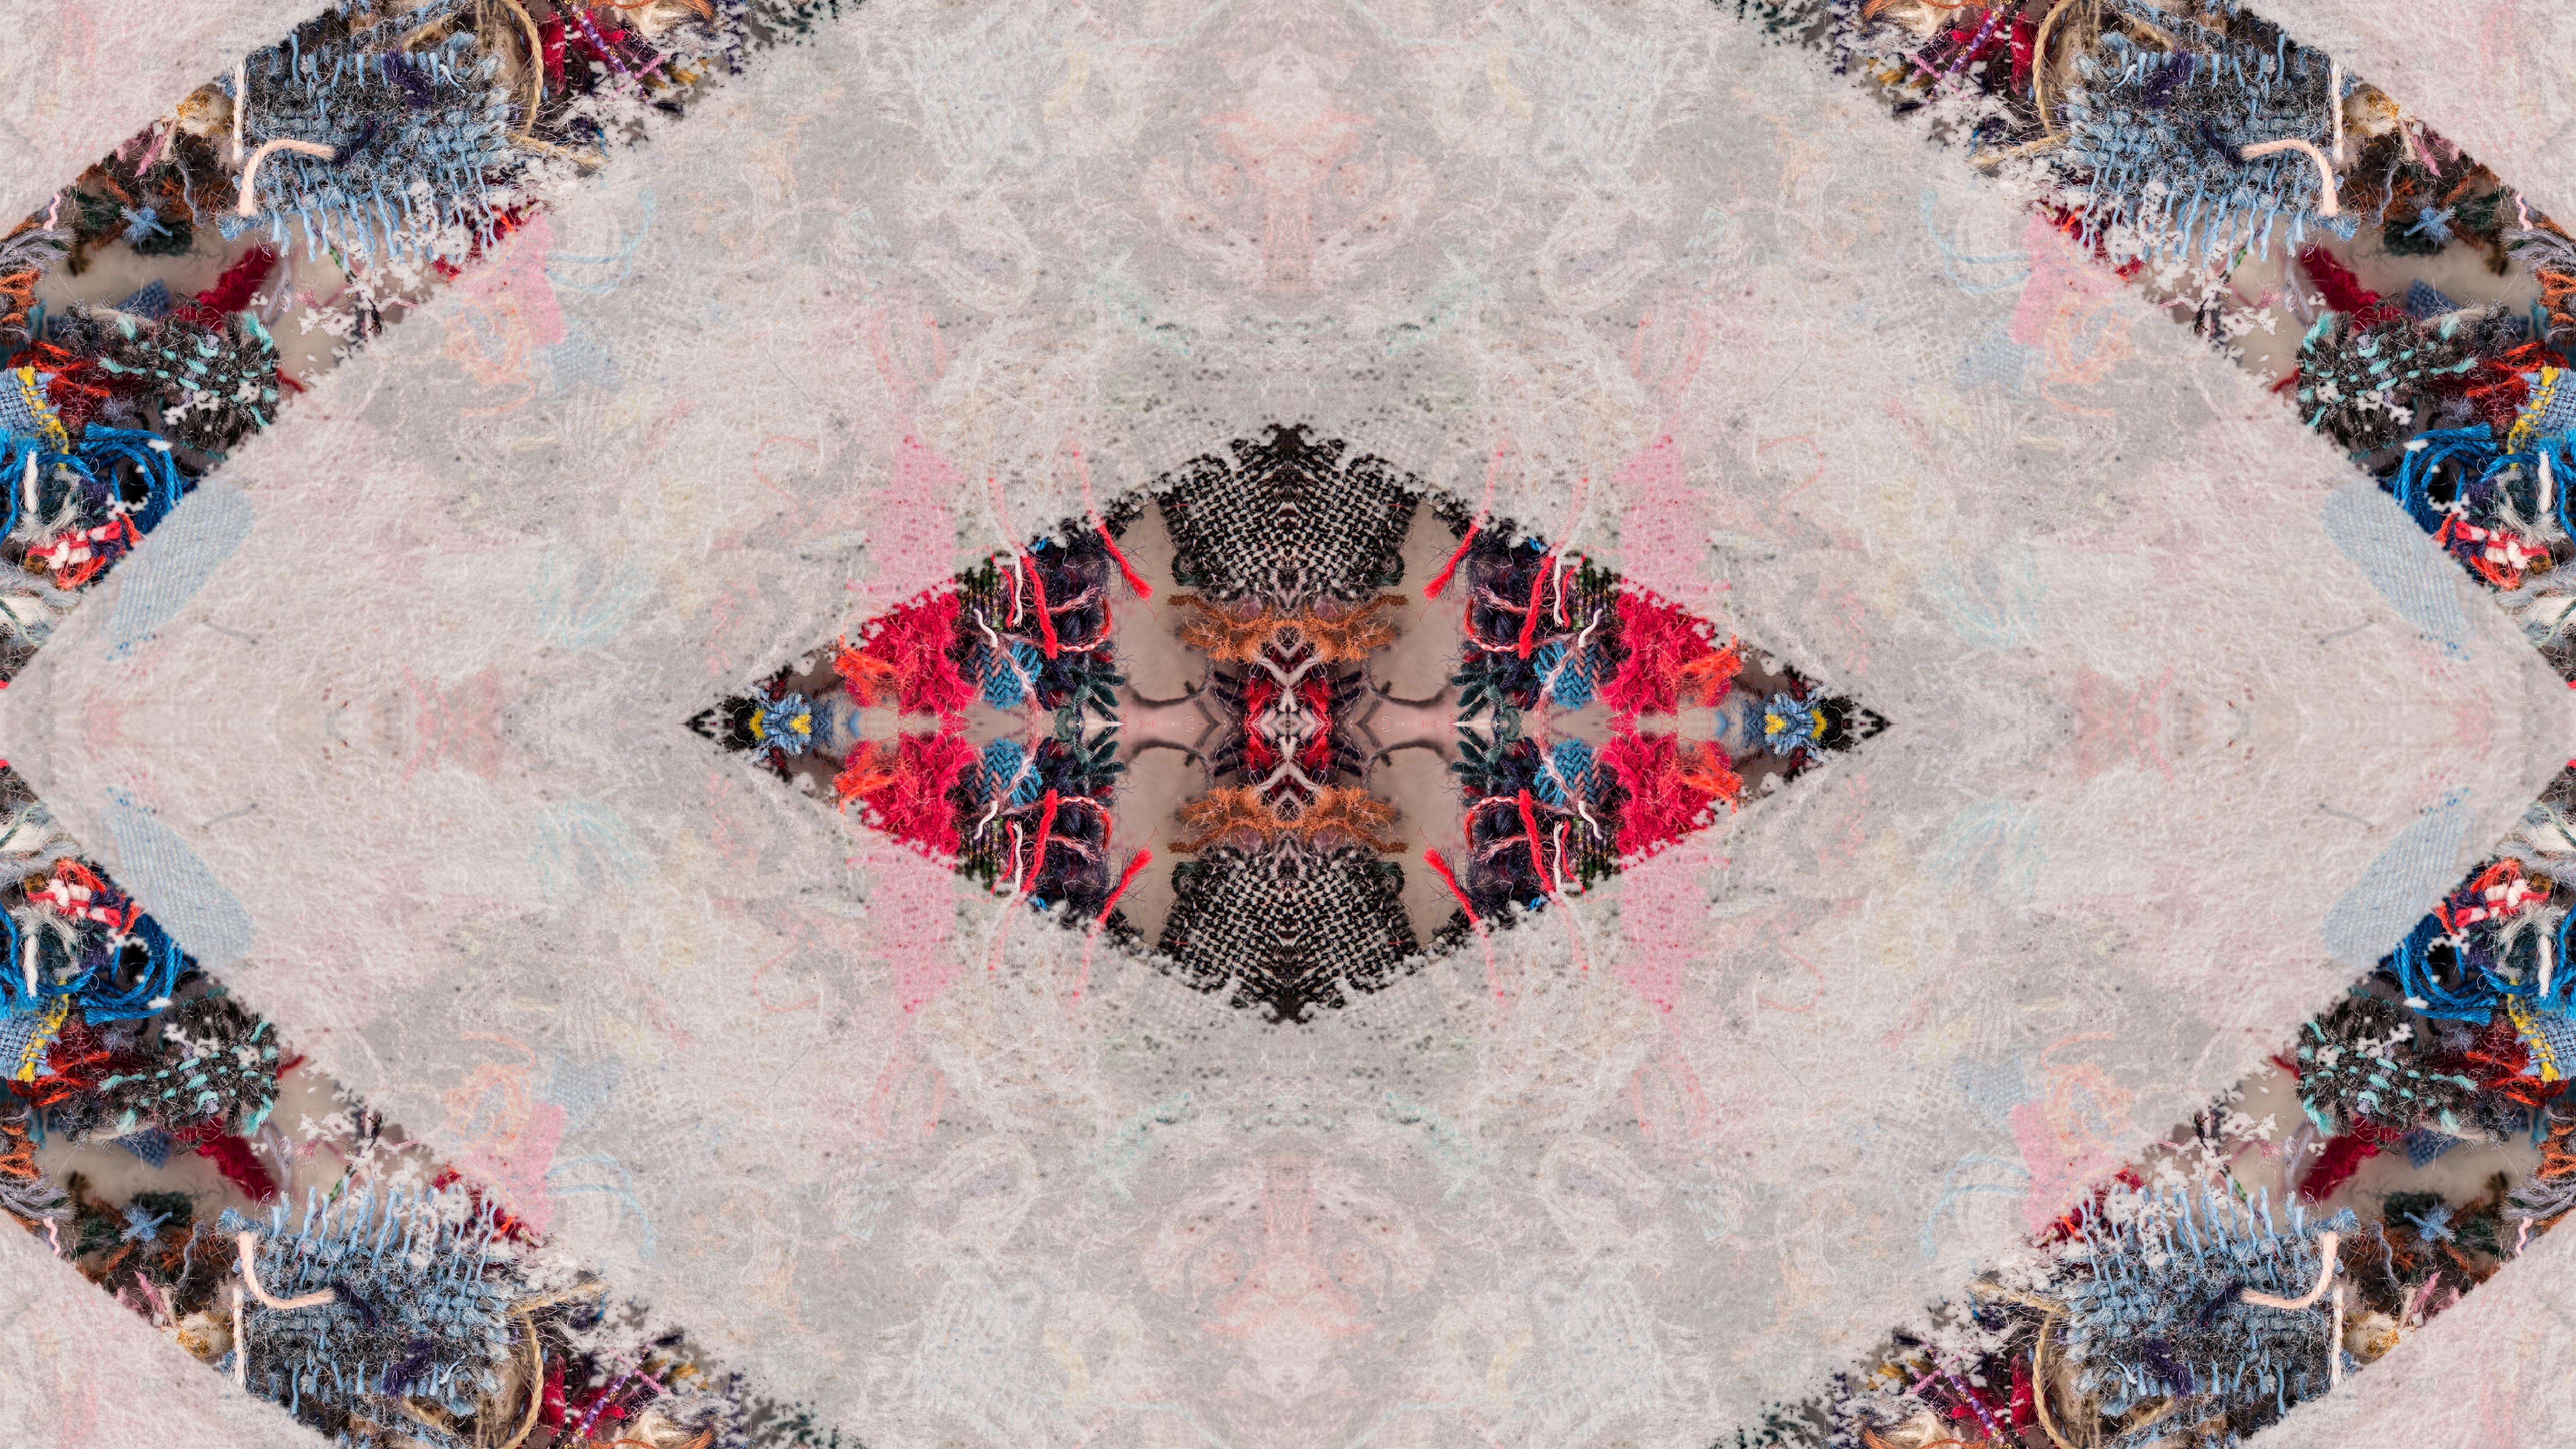 Mirrored Symmetry Abstract Pattern 7680x4320